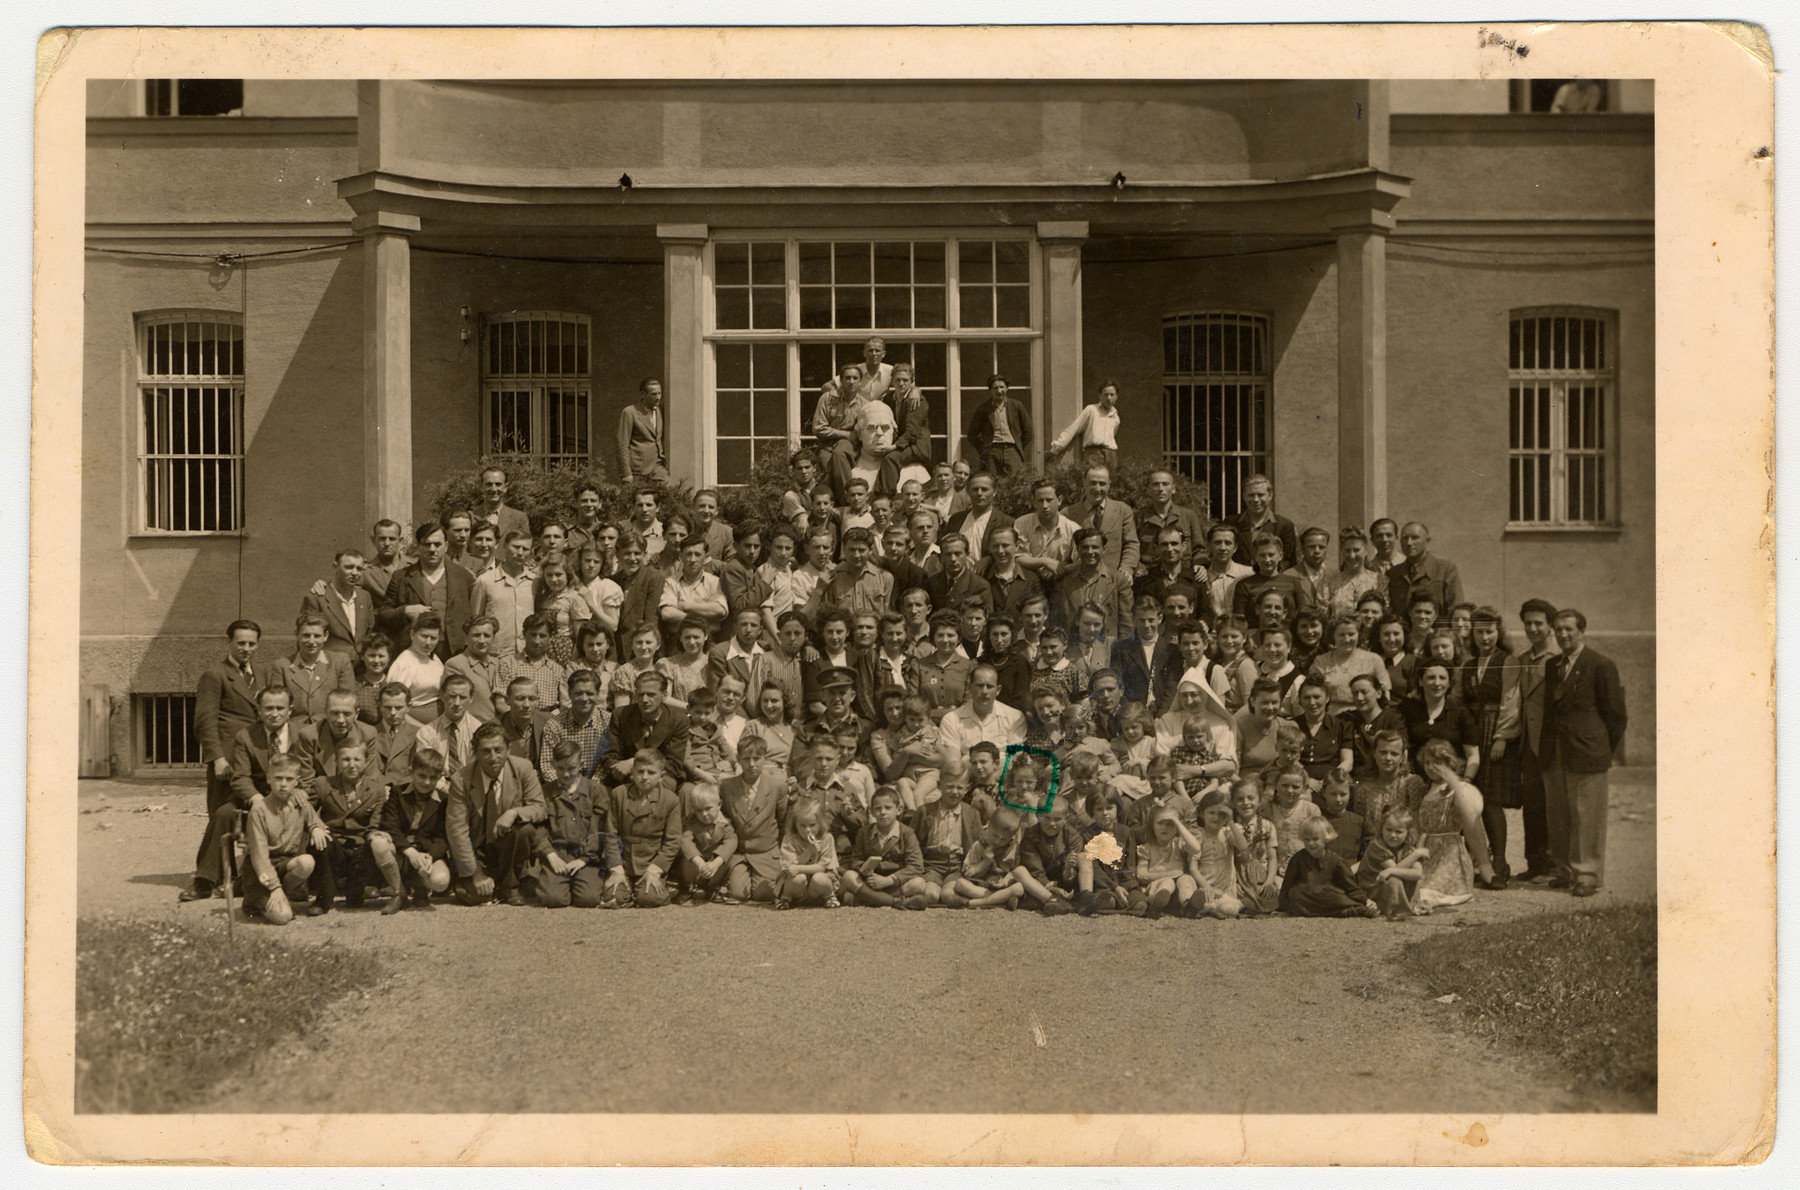 Group portrait of displaced persons at  Bad Woerishofen.

Among those pictured is Lucia Fenster (second row, circled).  Pictured in the first row standing third from the right is Rucha Halina Parys, who was born in Radomsko, Poland.